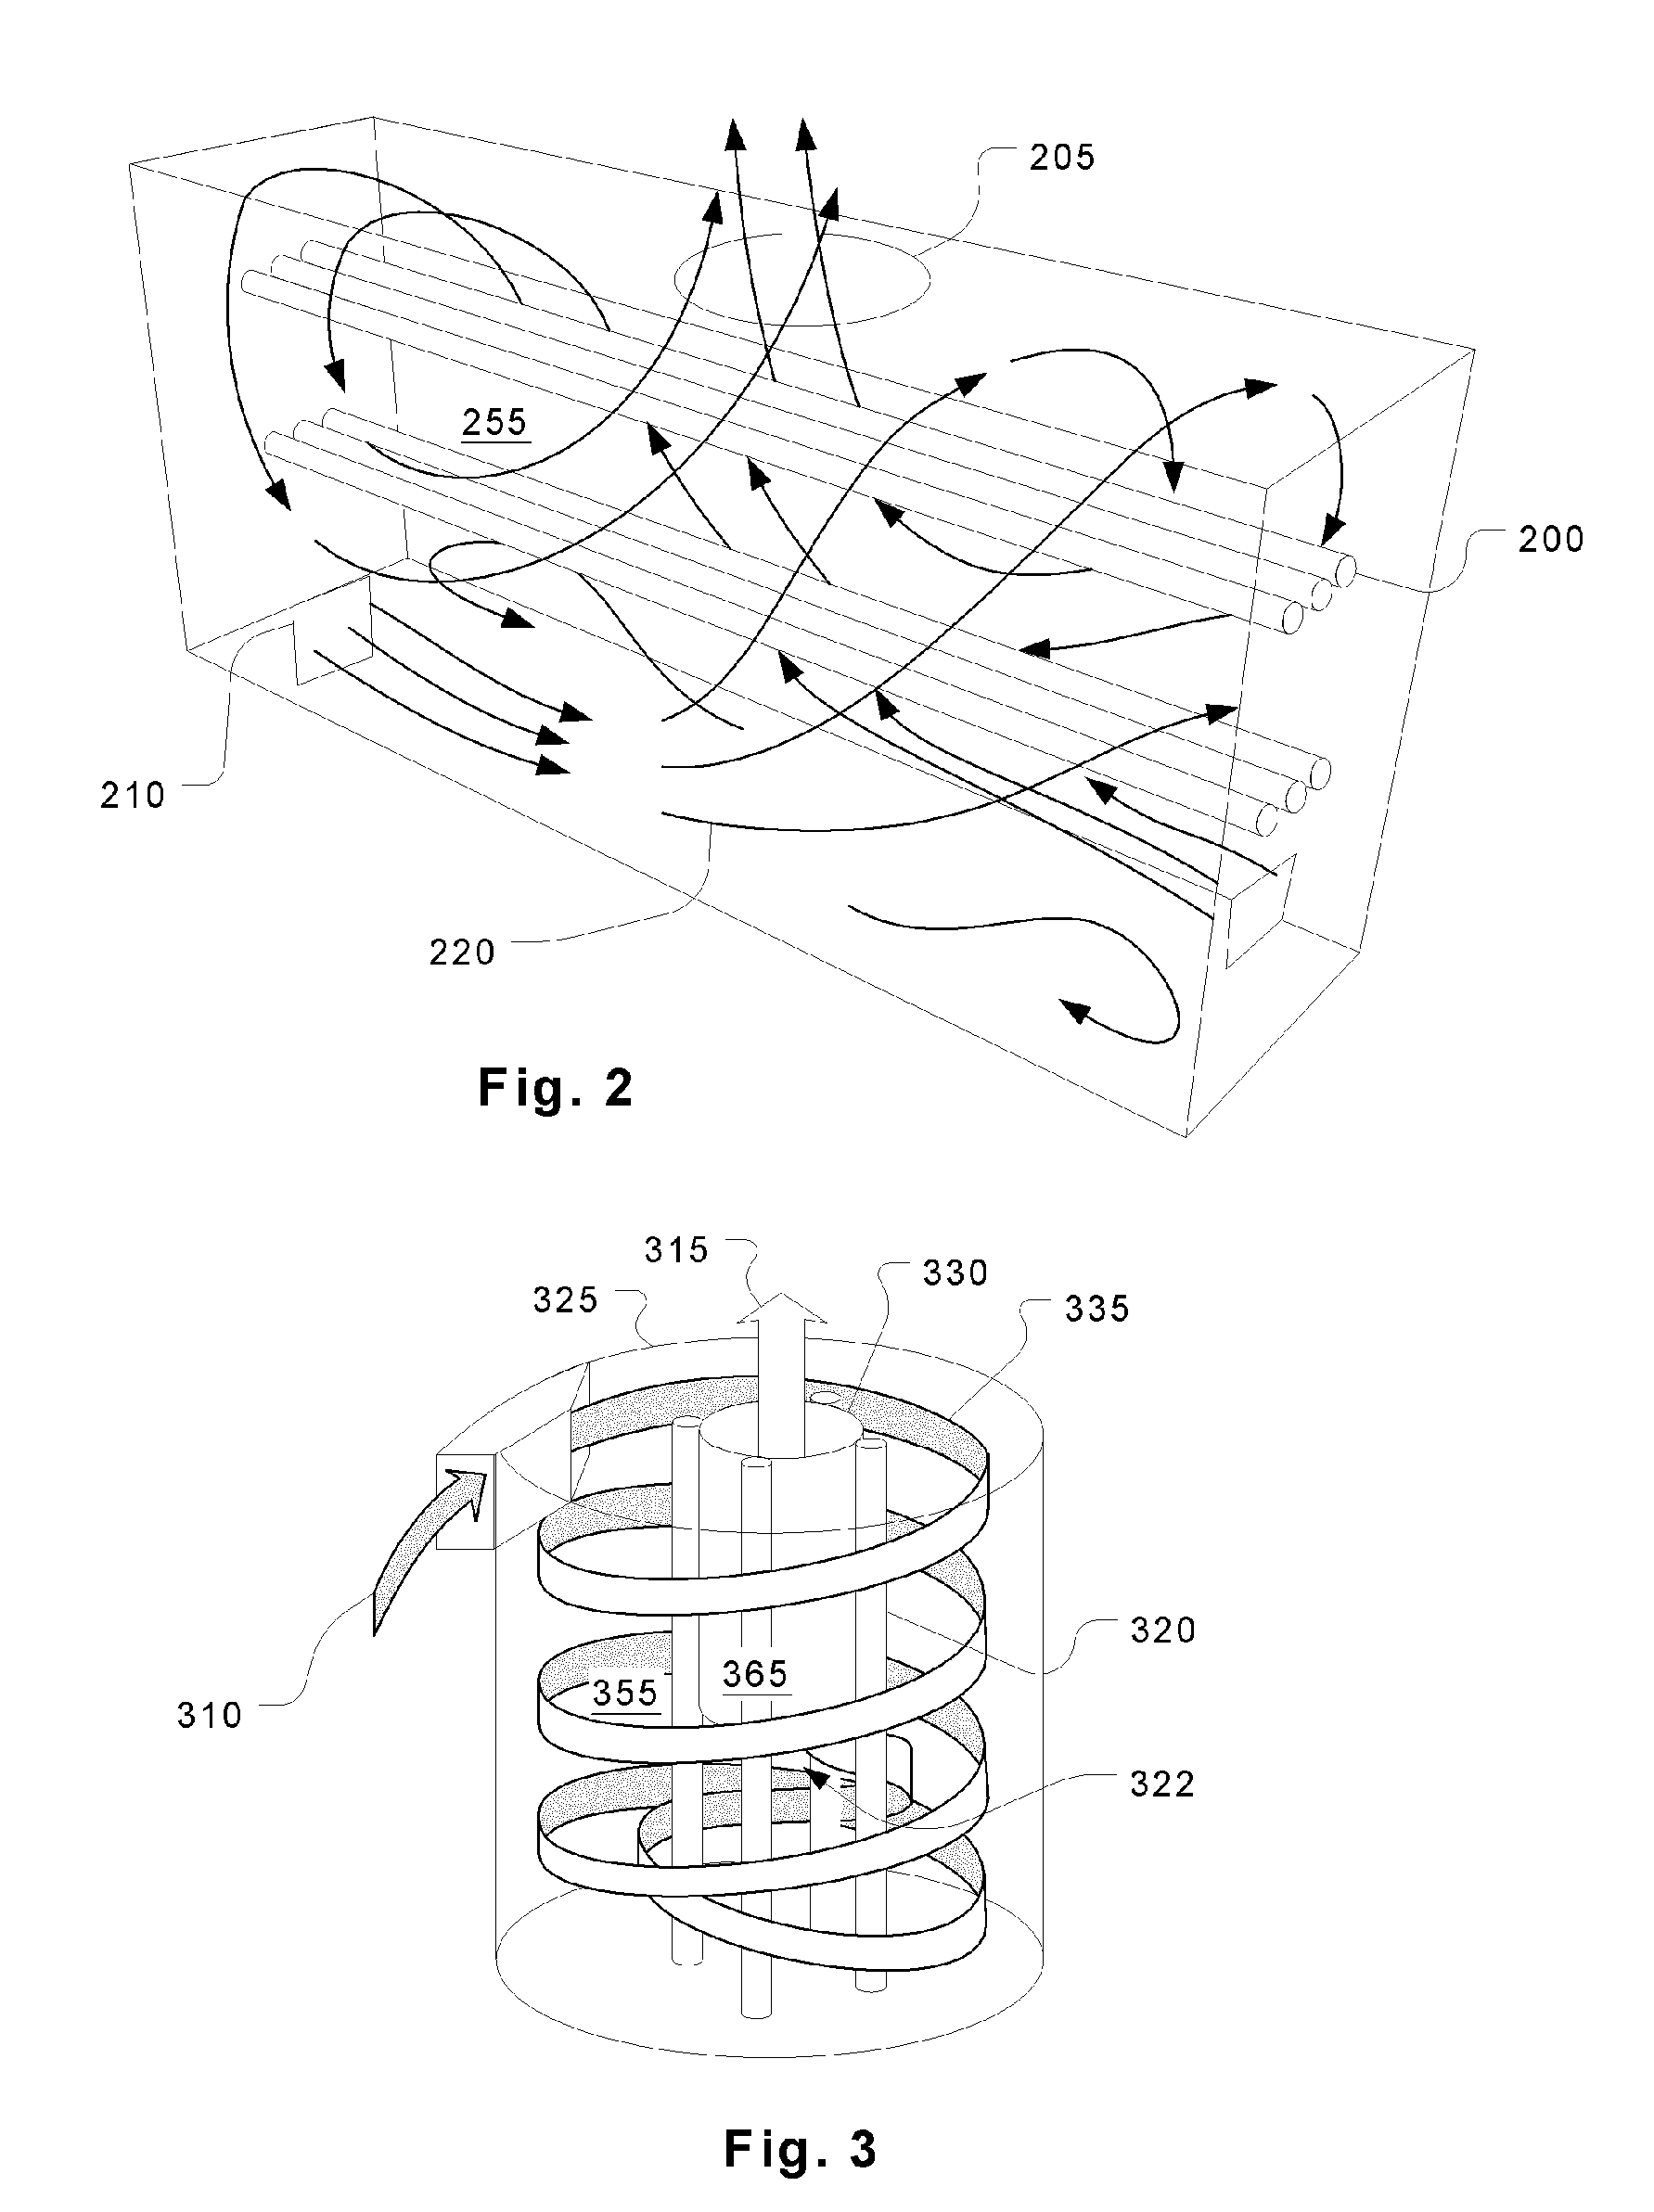 Fume treatment method and apparatus using ultraviolet light to degrade contaminants